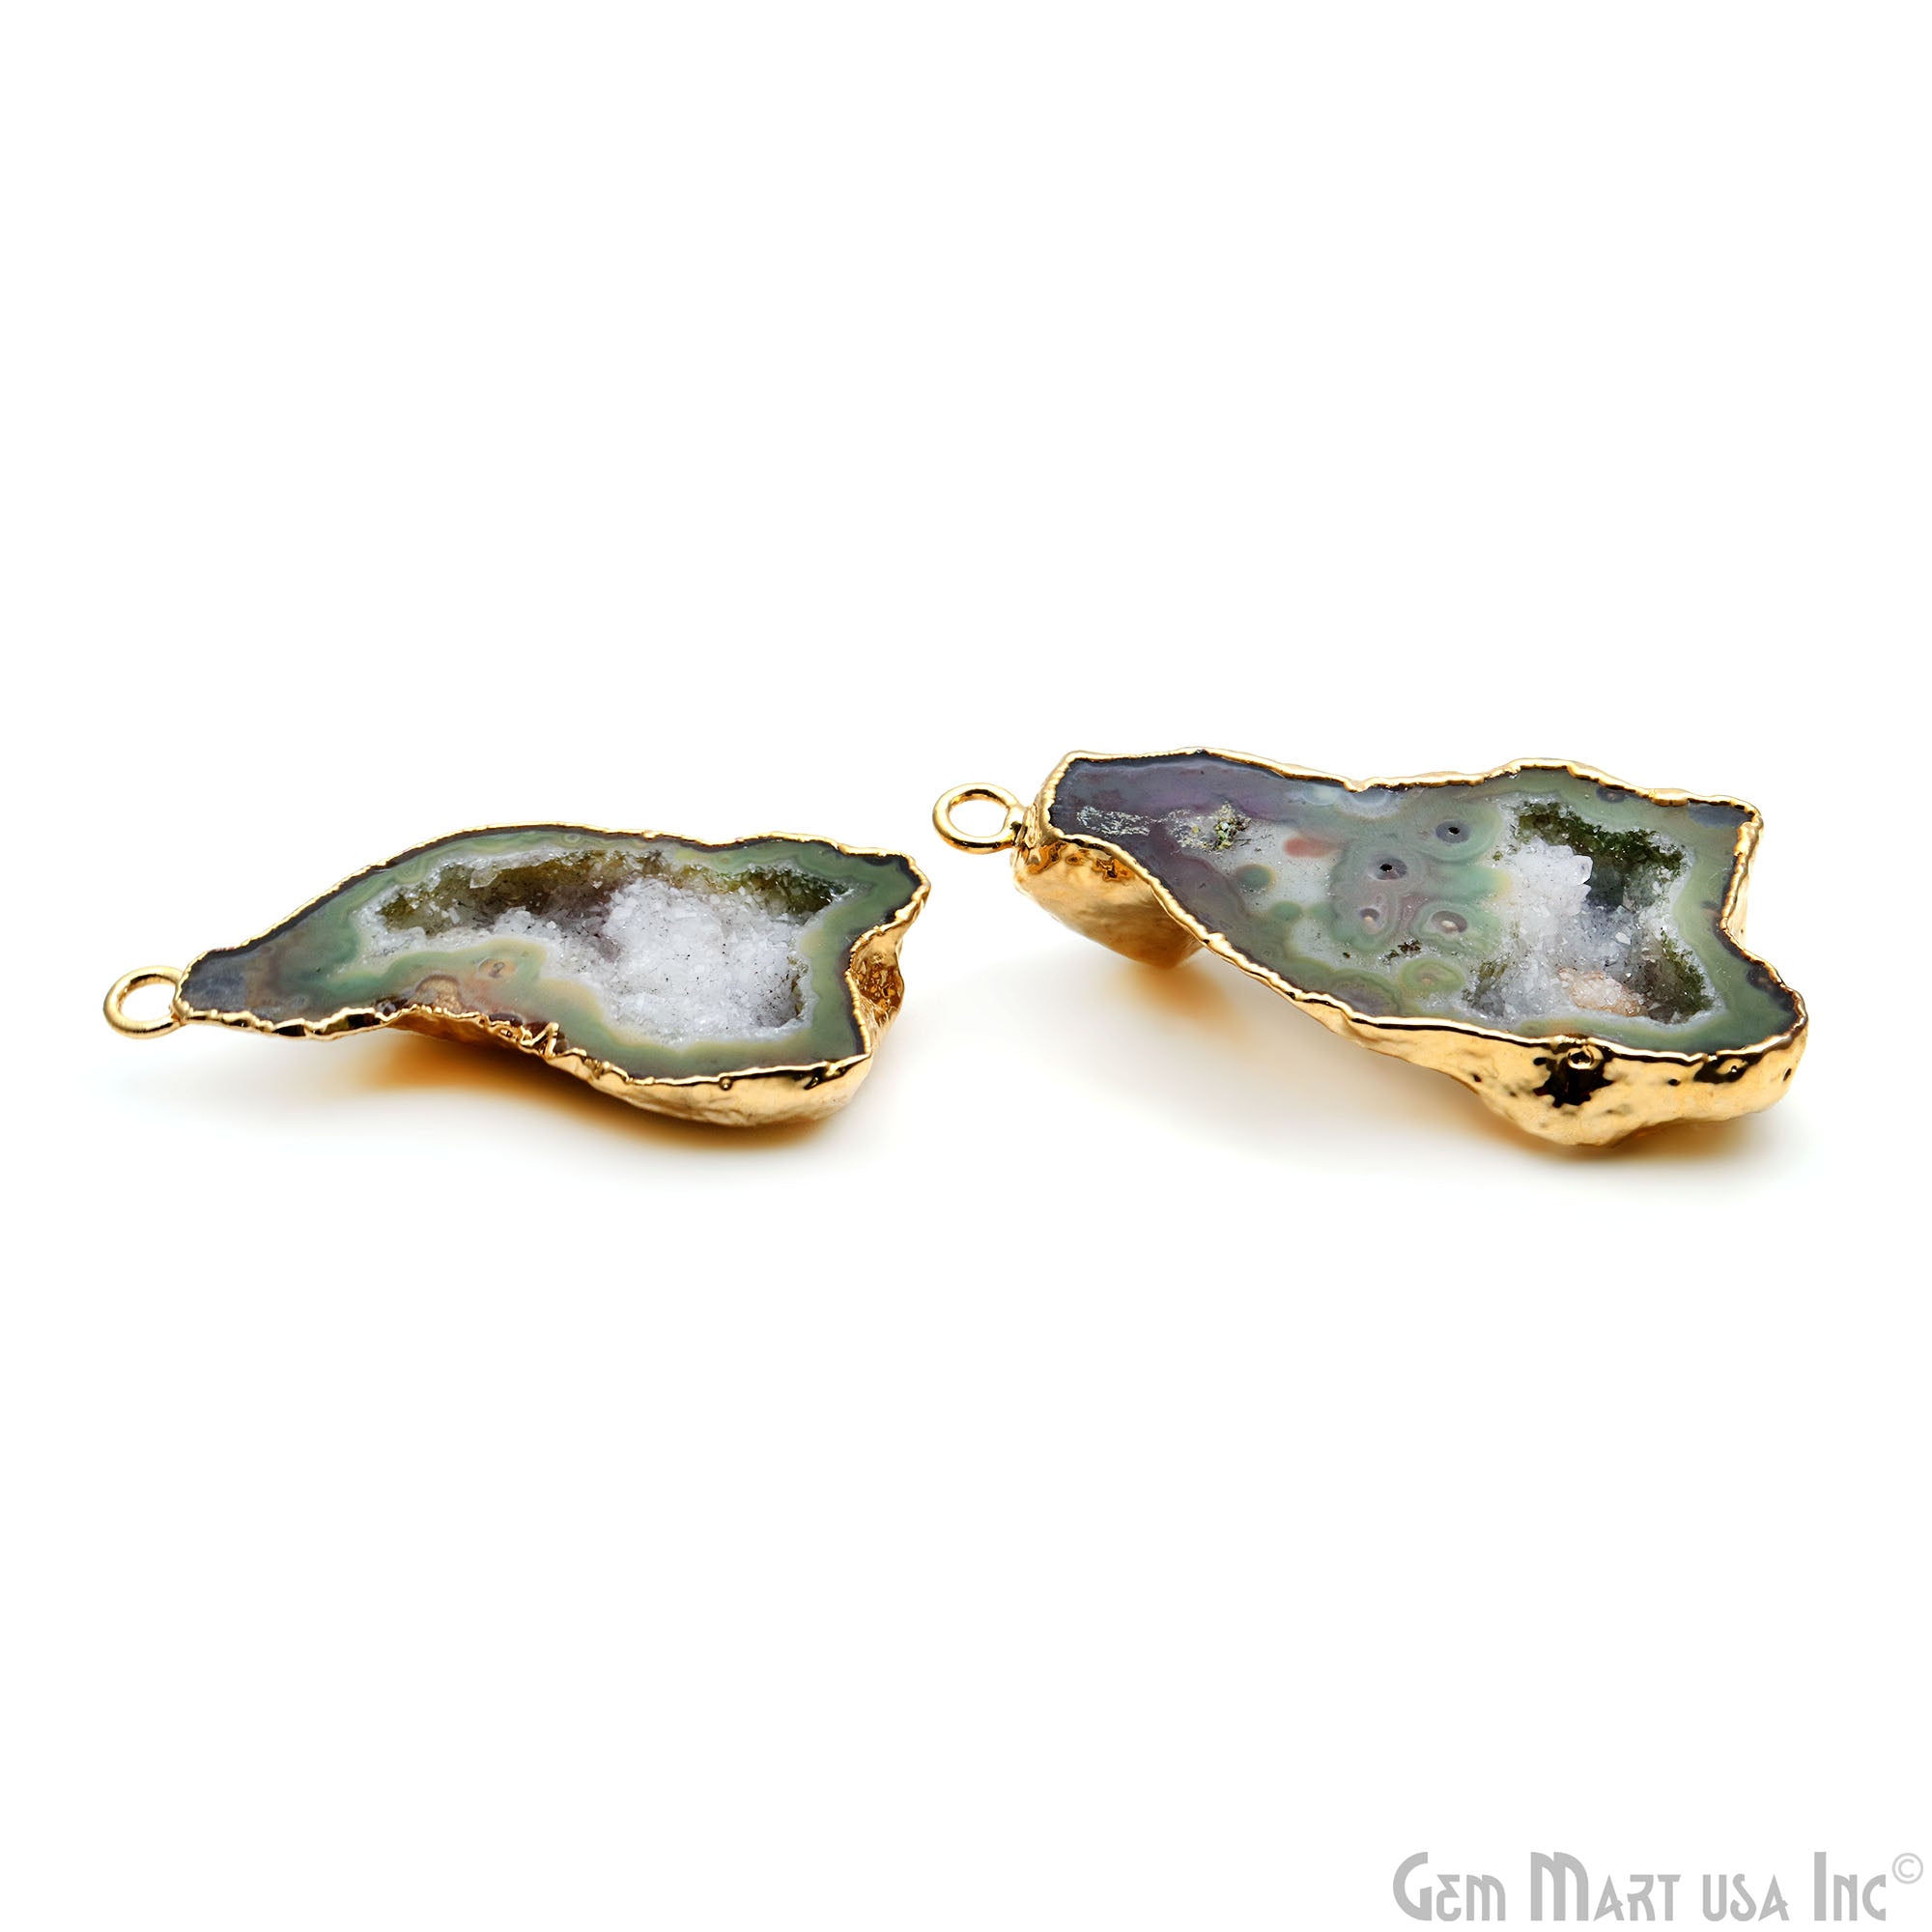 Geode Druzy 45x22mm Organic Gold Electroplated Single Bail Gemstone Earring Connector 1 Pair